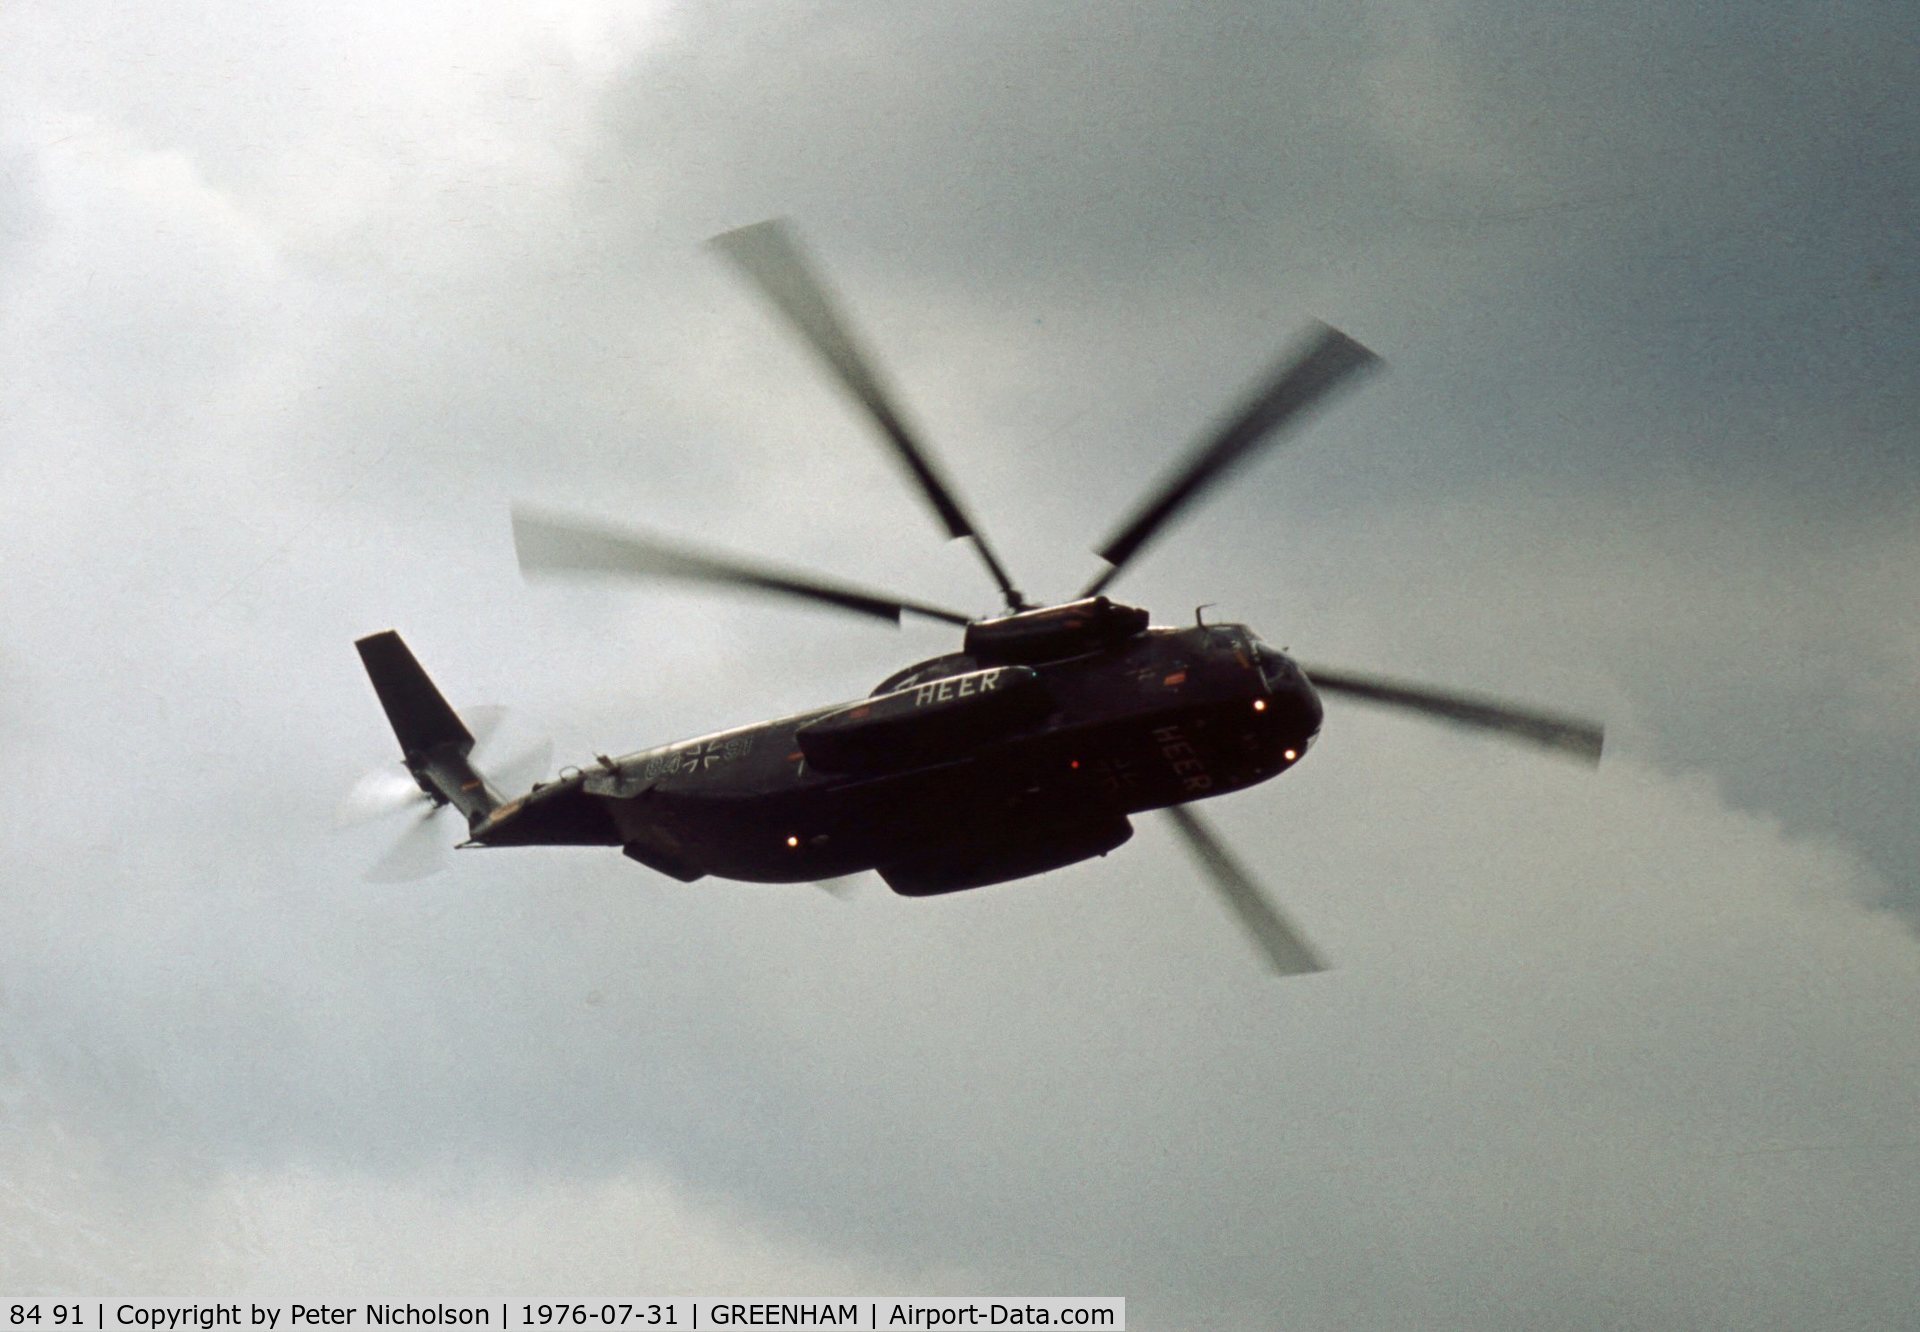 84 91, Sikorsky (VFW-Fokker) CH-53G C/N V65-089, Another view of the HFR-15 CH-53G at the 1976 Intnl Air Tattoo at RAF Greenham Common.